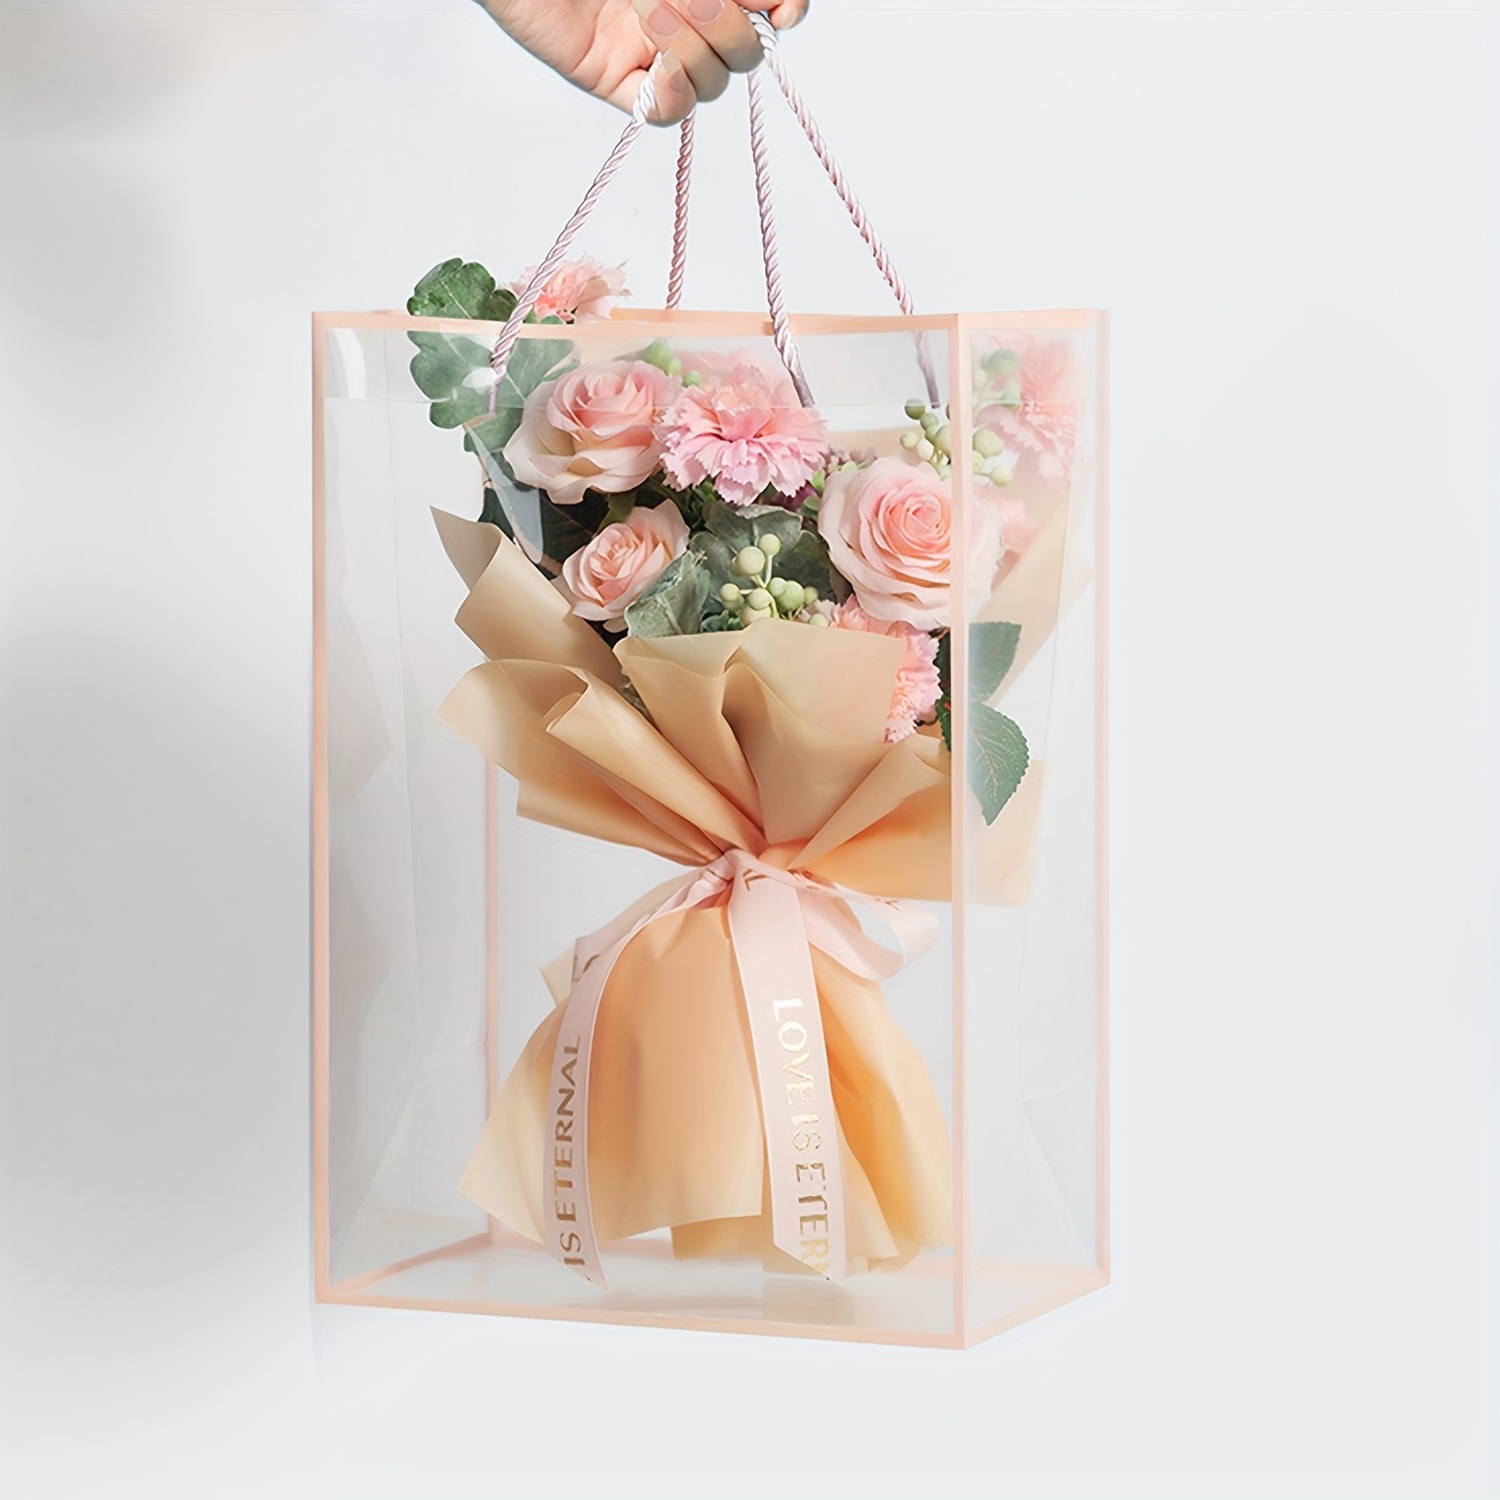 20 Pack Clear Gift Bags with Handle Clear Party Favor Bags Gift Bags Bulk  for Favors Reusable Plastic PVC Tote Bag for Christmas Wedding Flowers